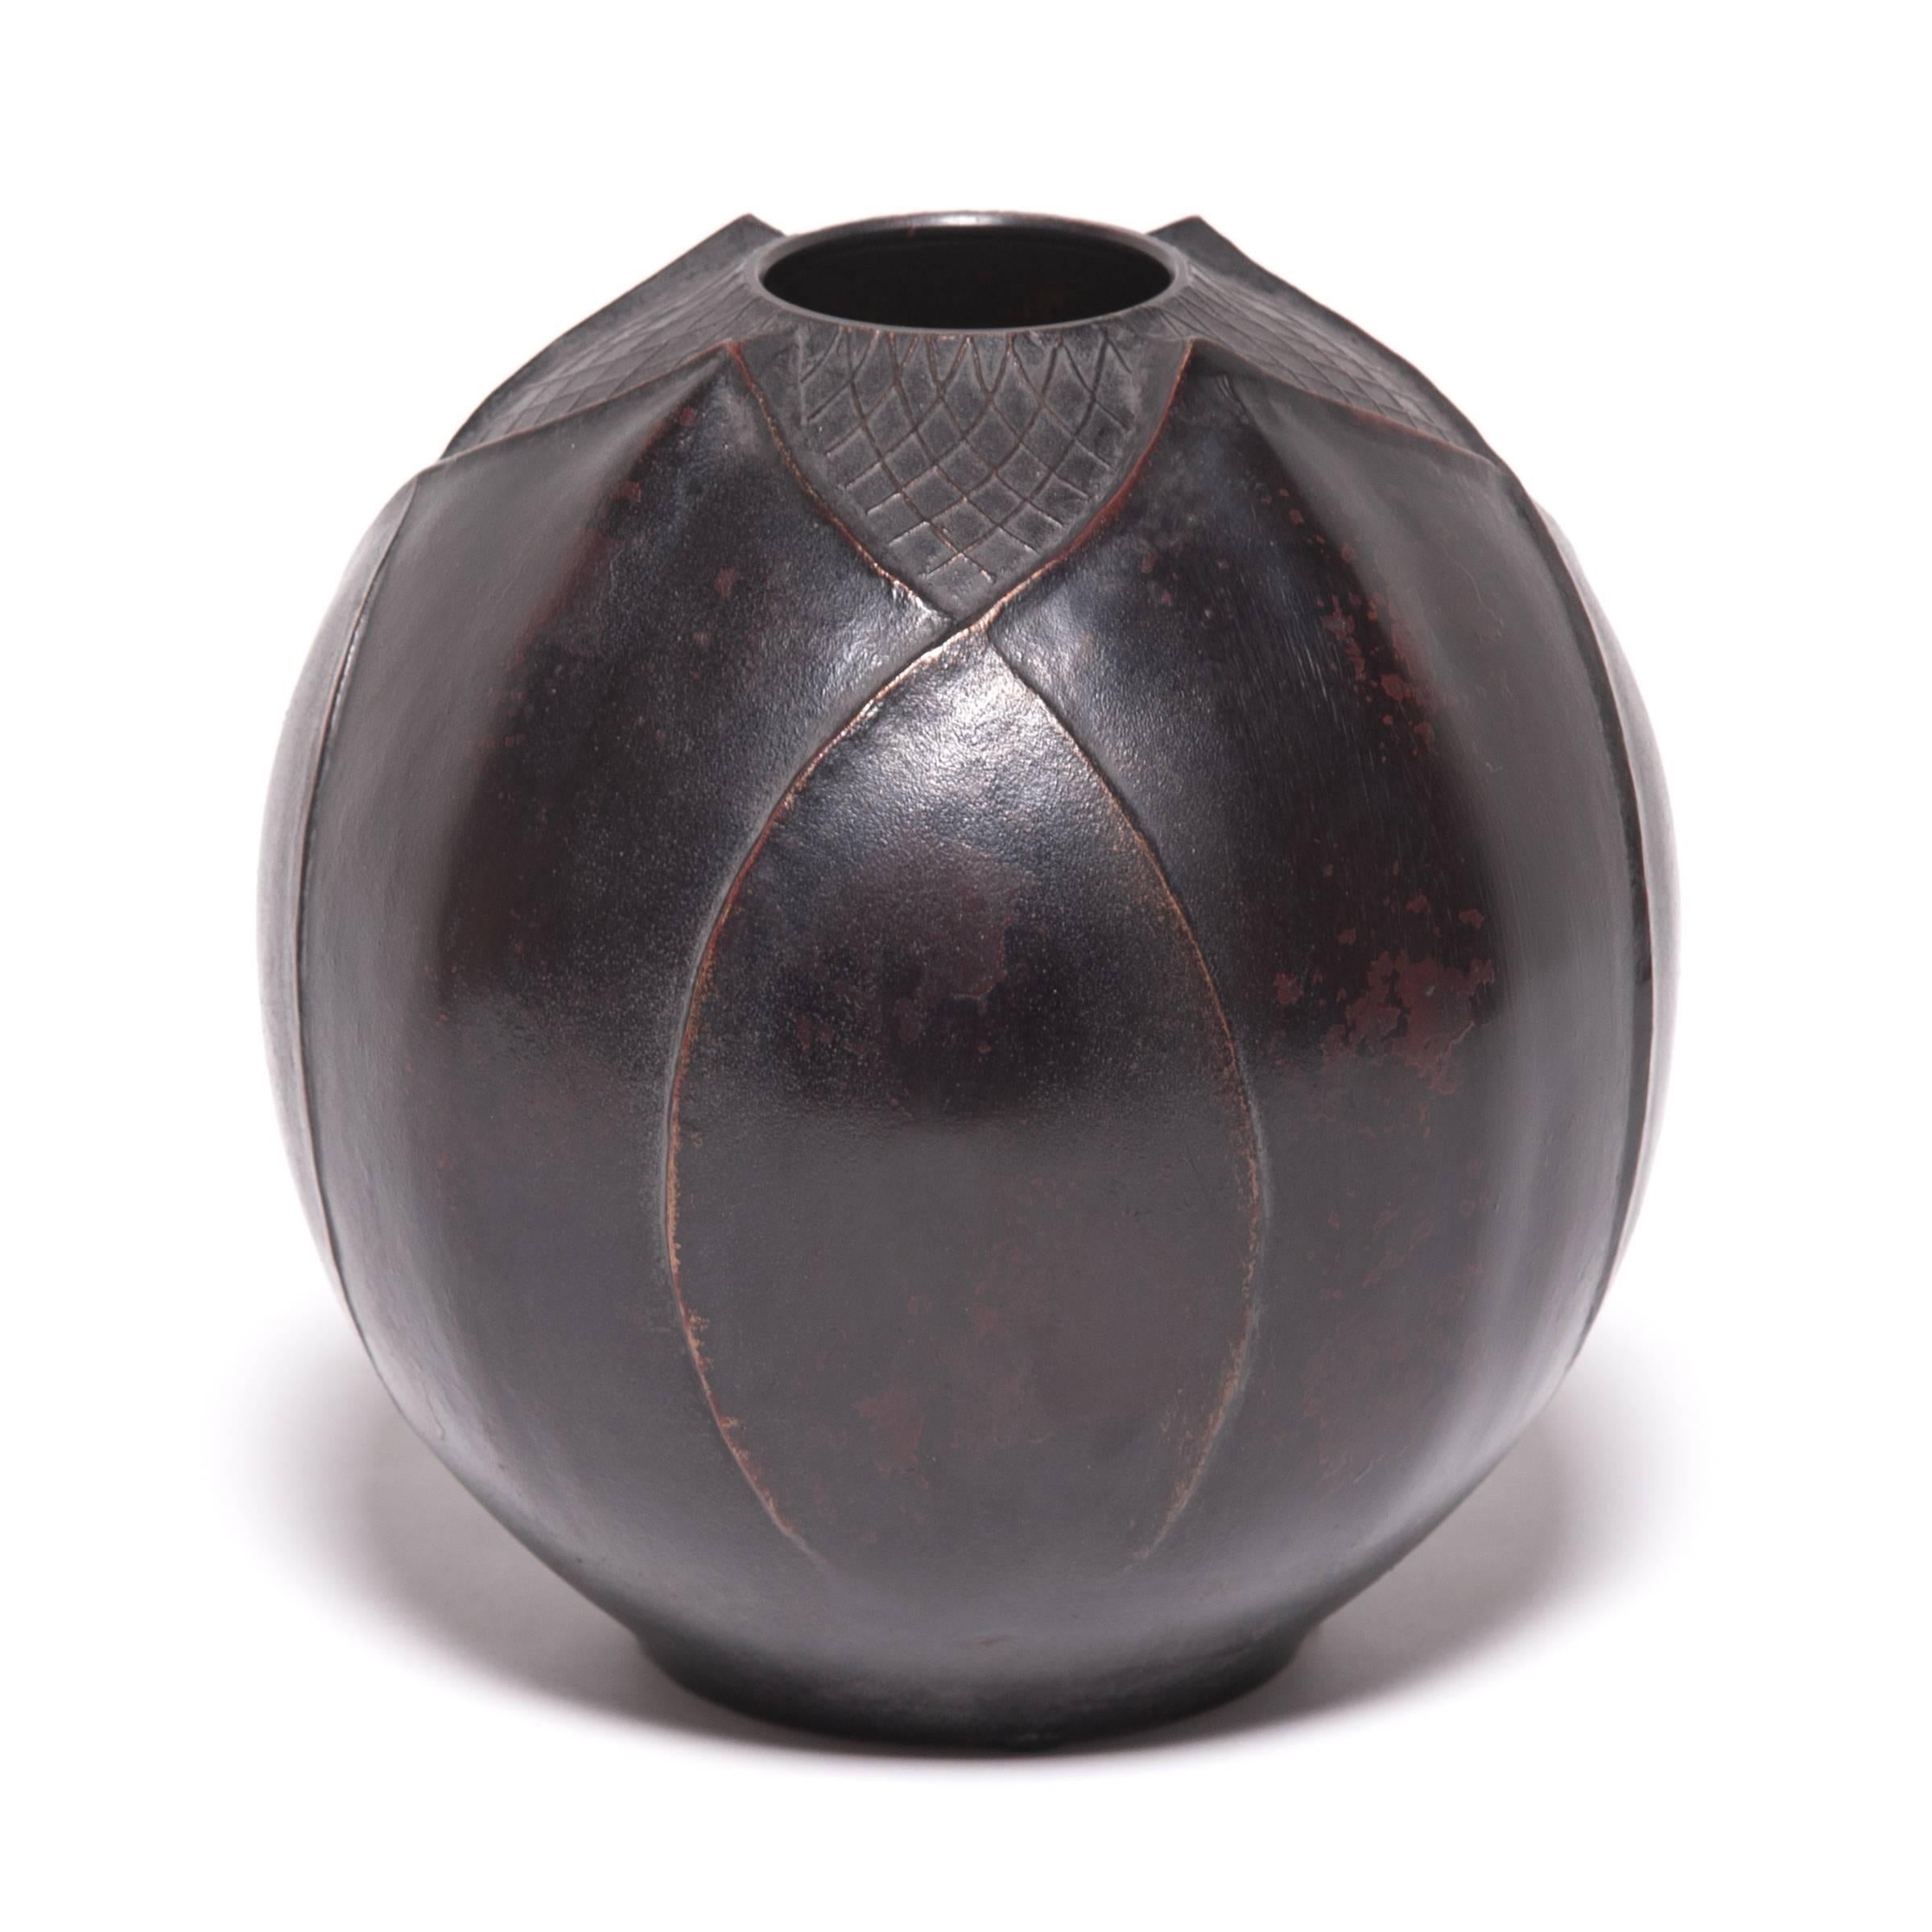 Traditional Japanese metalworkers are renowned for creating specialized alloys that elevated the art of refining, molding, and casting metals. An alloy of zinc and copper gives this metal vessel its rich dark color, cast in the shape of lotus flower